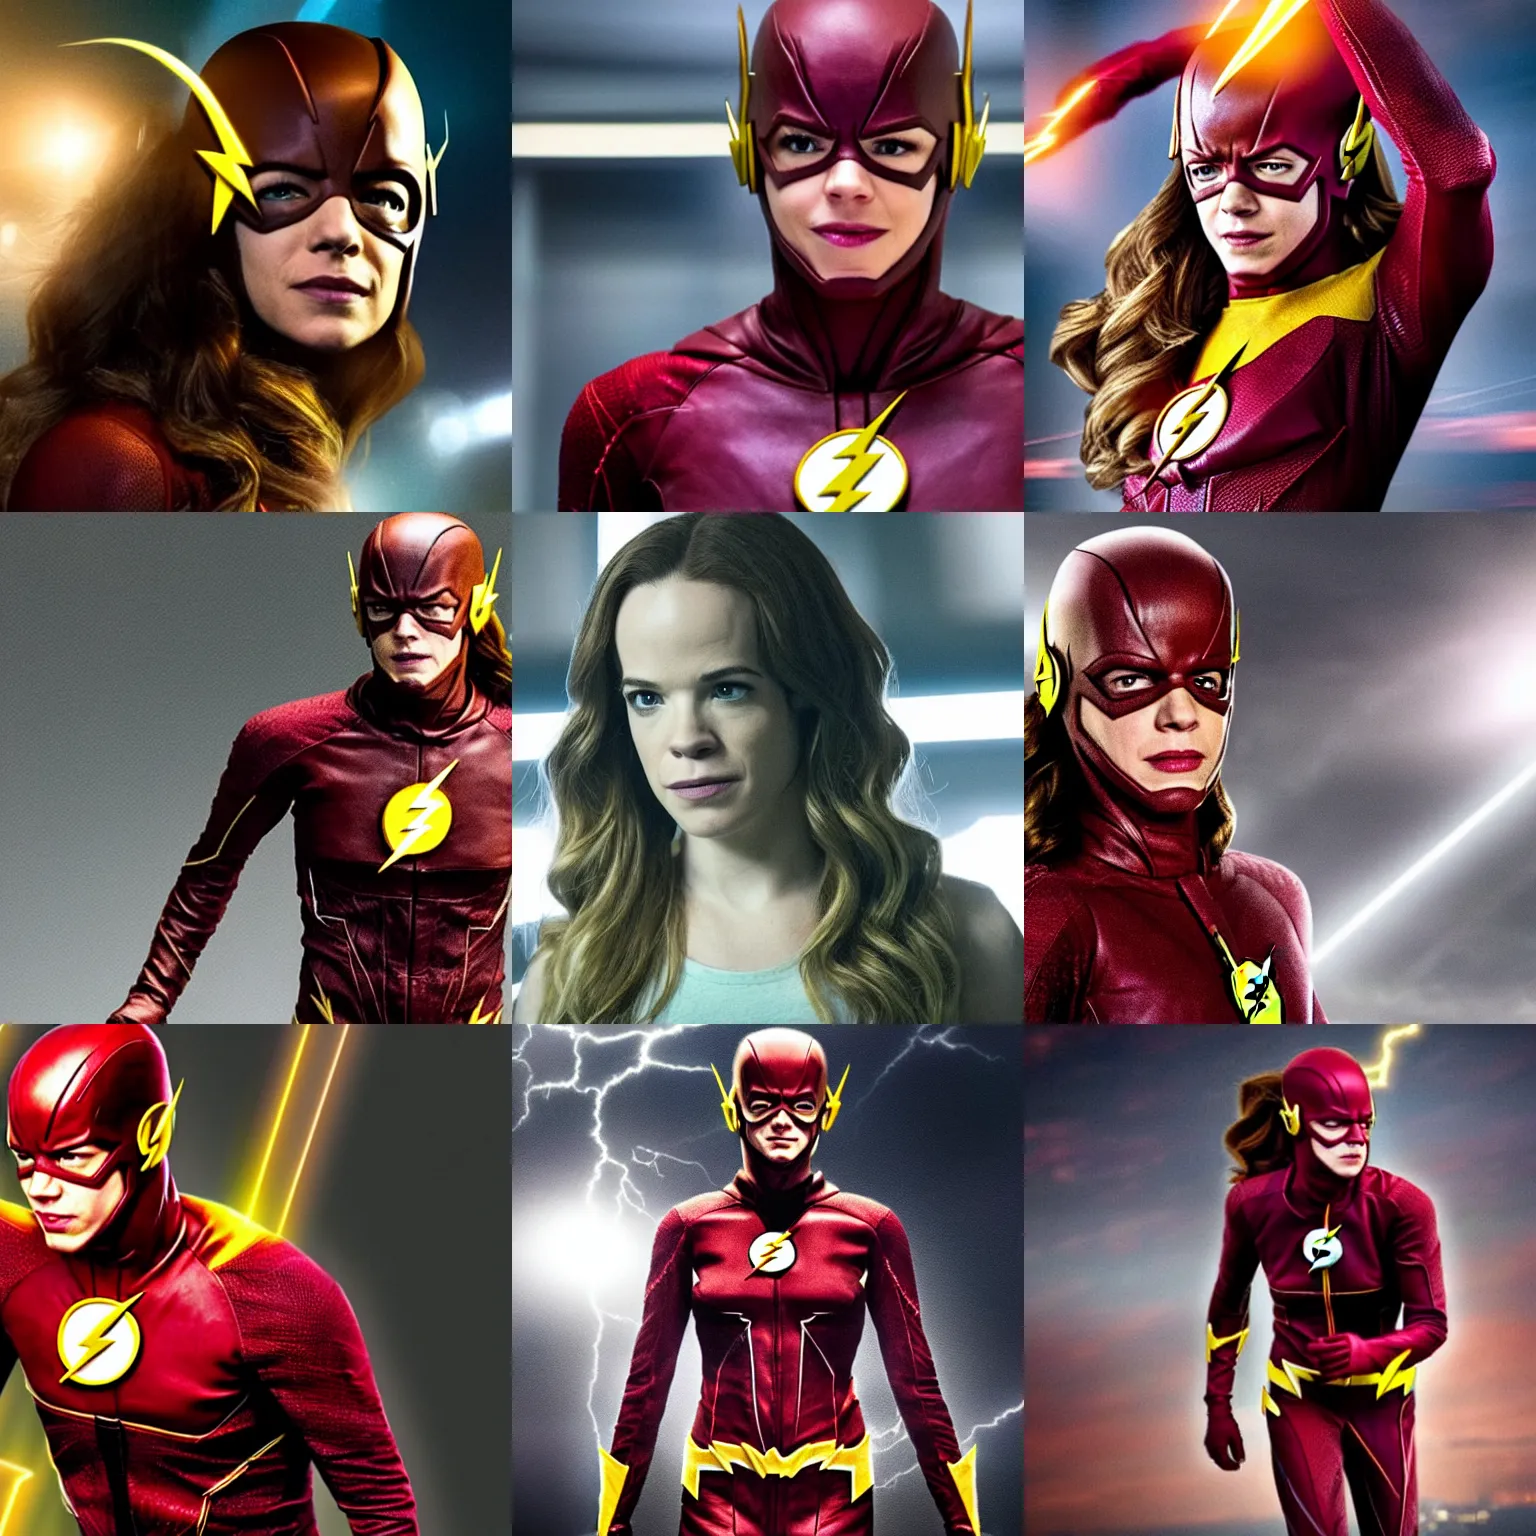 Prompt: Danielle Panabaker as the Flash, from the DC movie 'Flash' (2022)